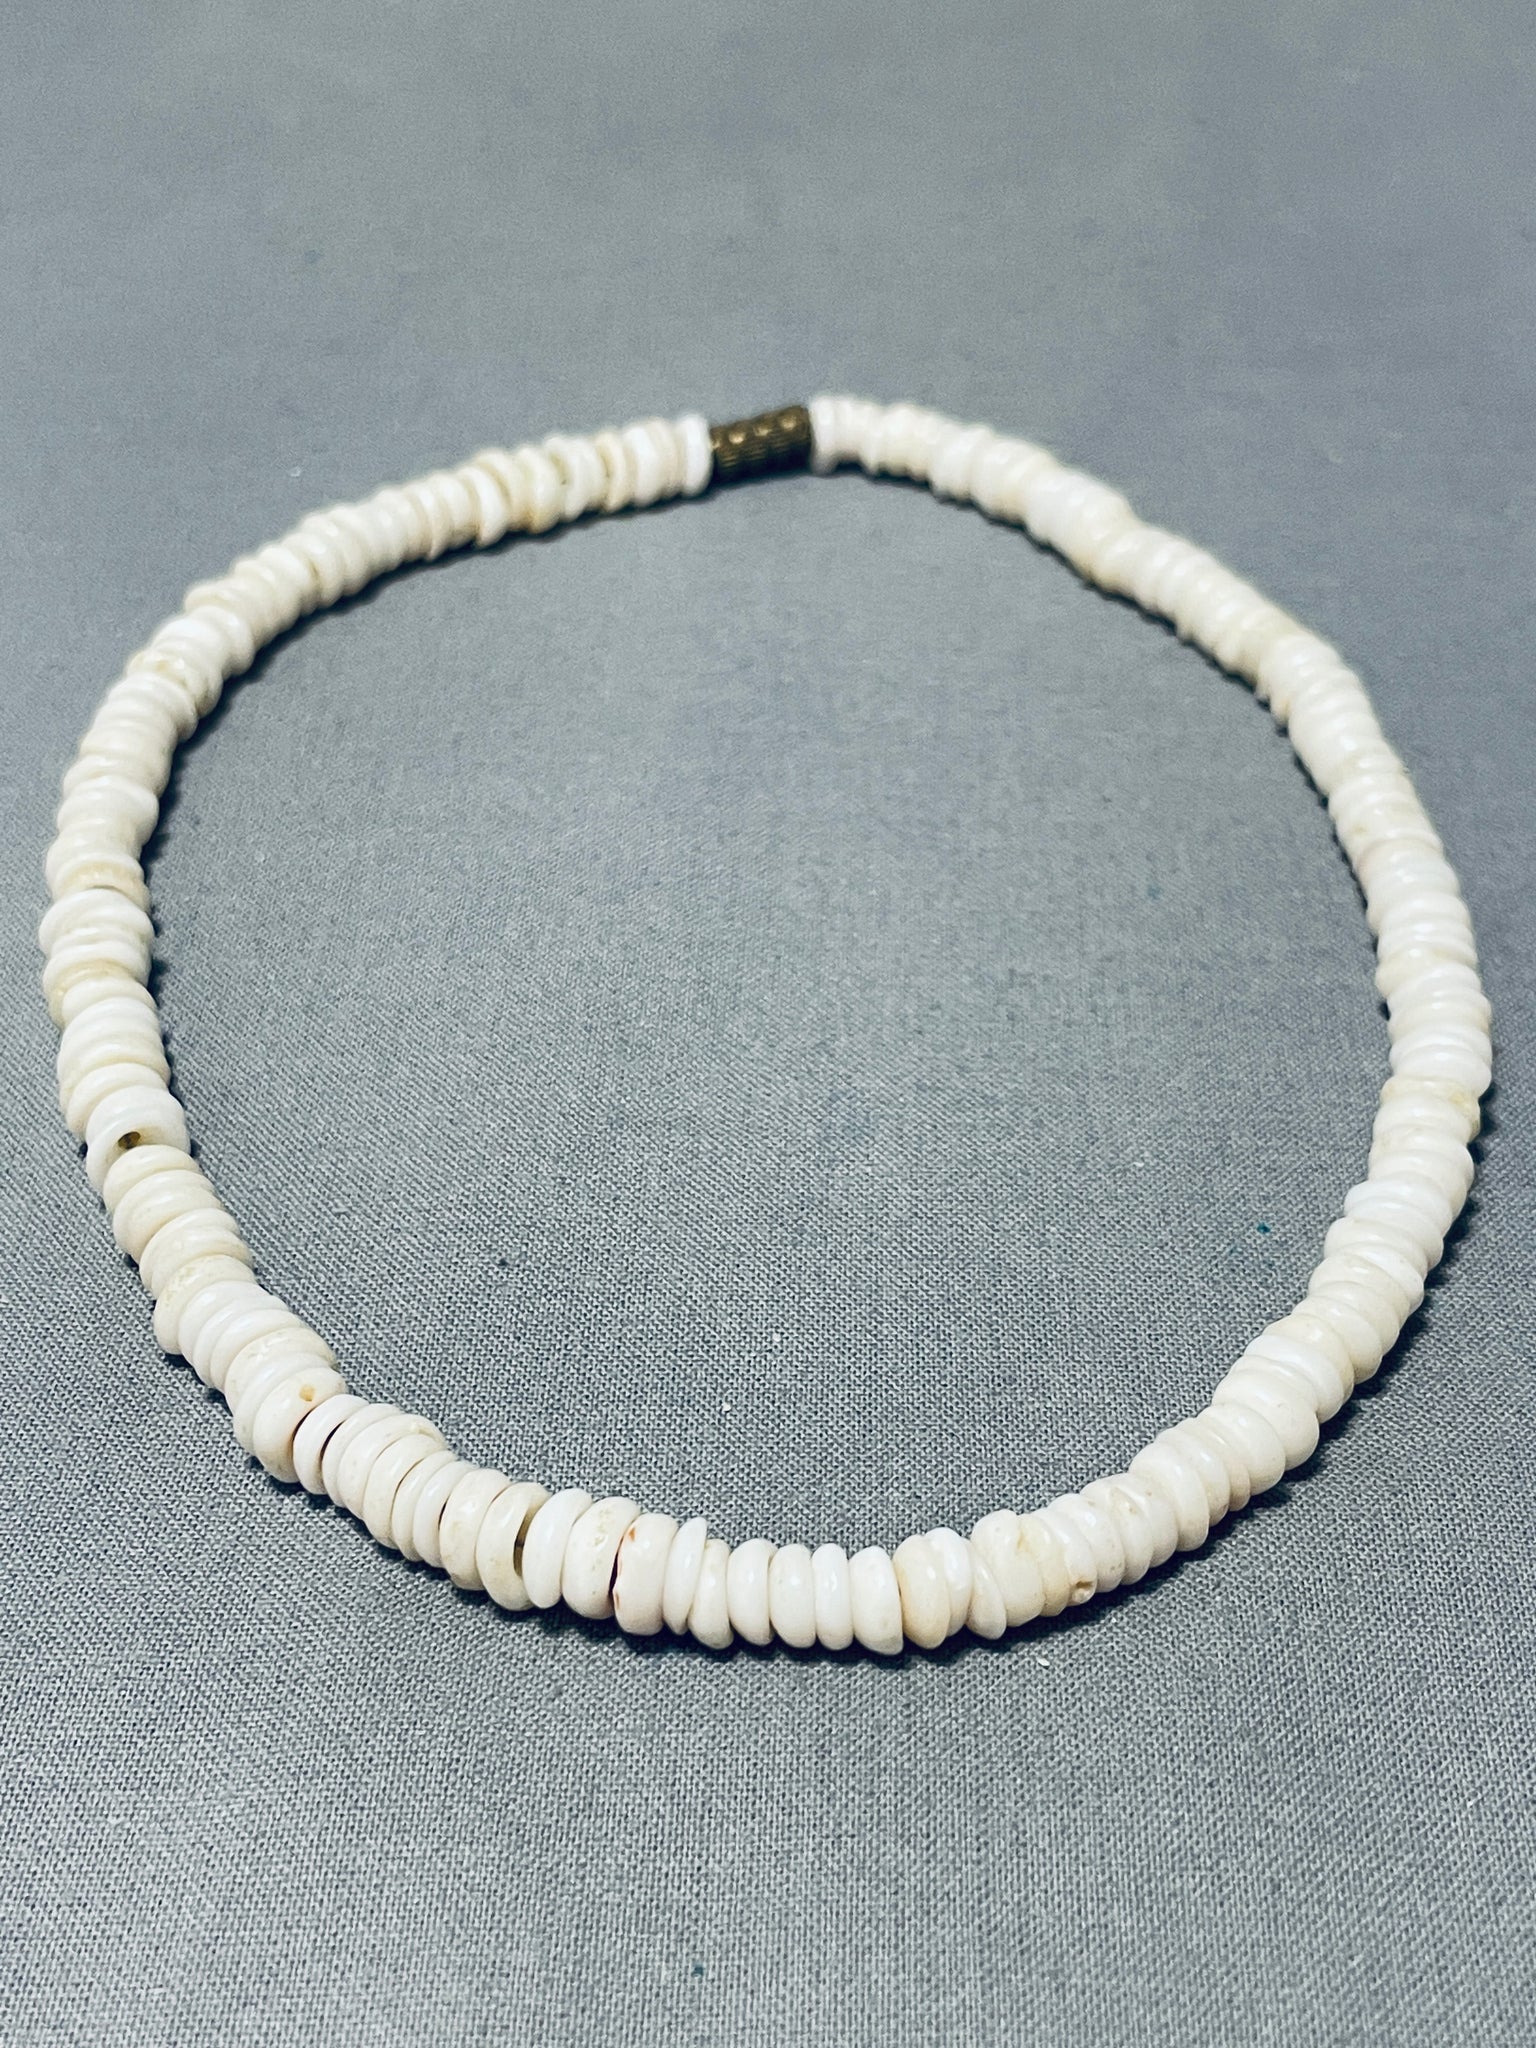 Real Puka Shell Necklace 1970's from Hawaii - Ruby Lane